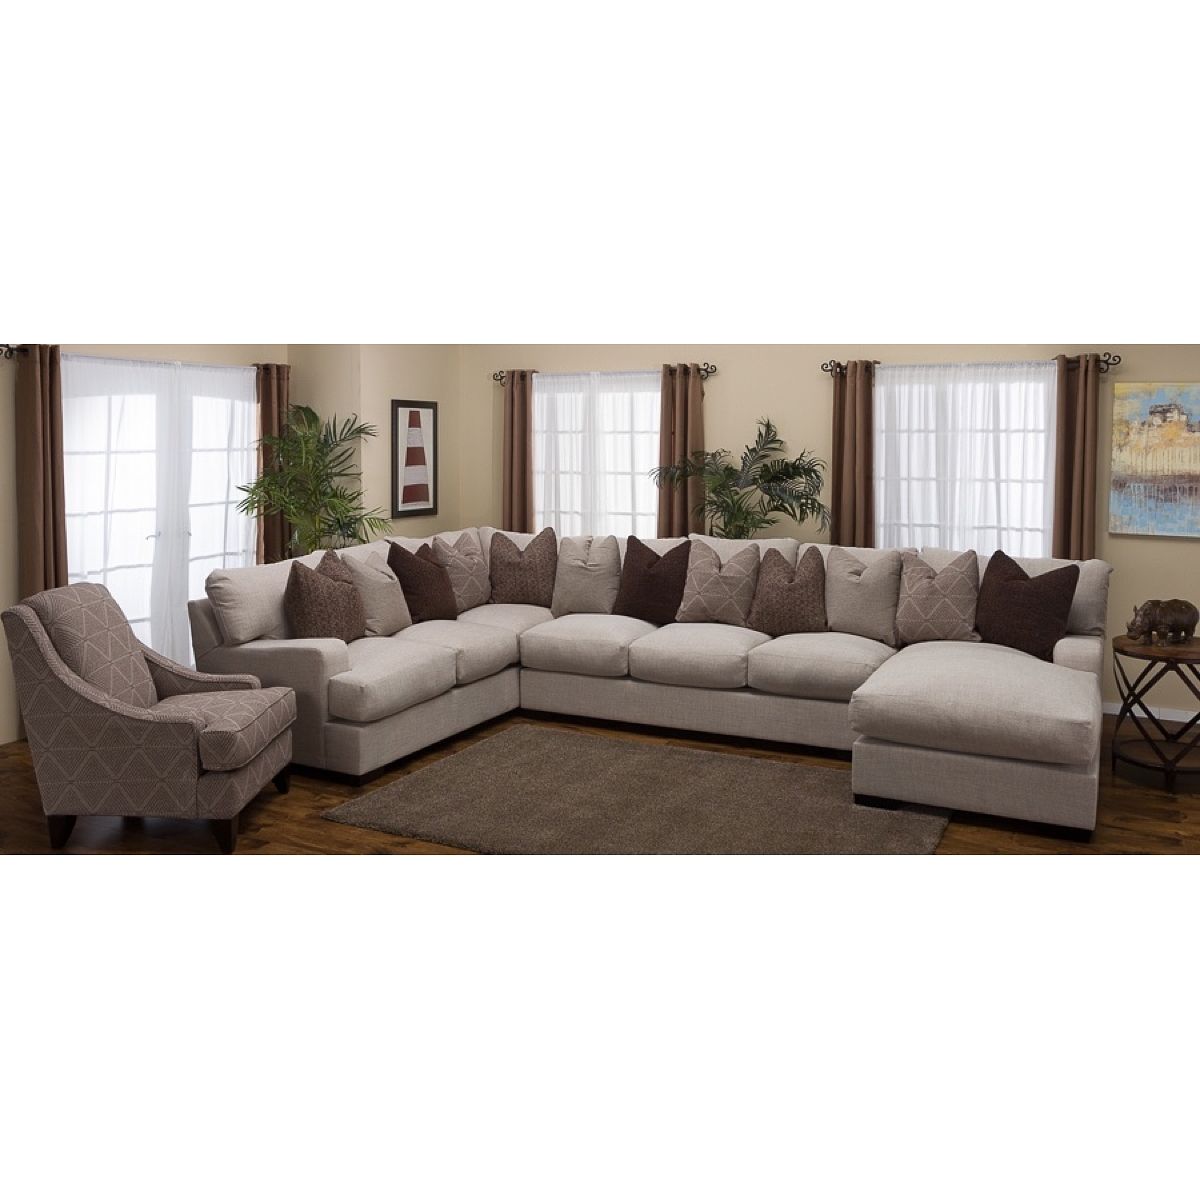 Charming Sectional Sofas Ct 42 For Your Eco Friendly Sectional Within Eco Friendly Sectional Sofa (View 8 of 12)